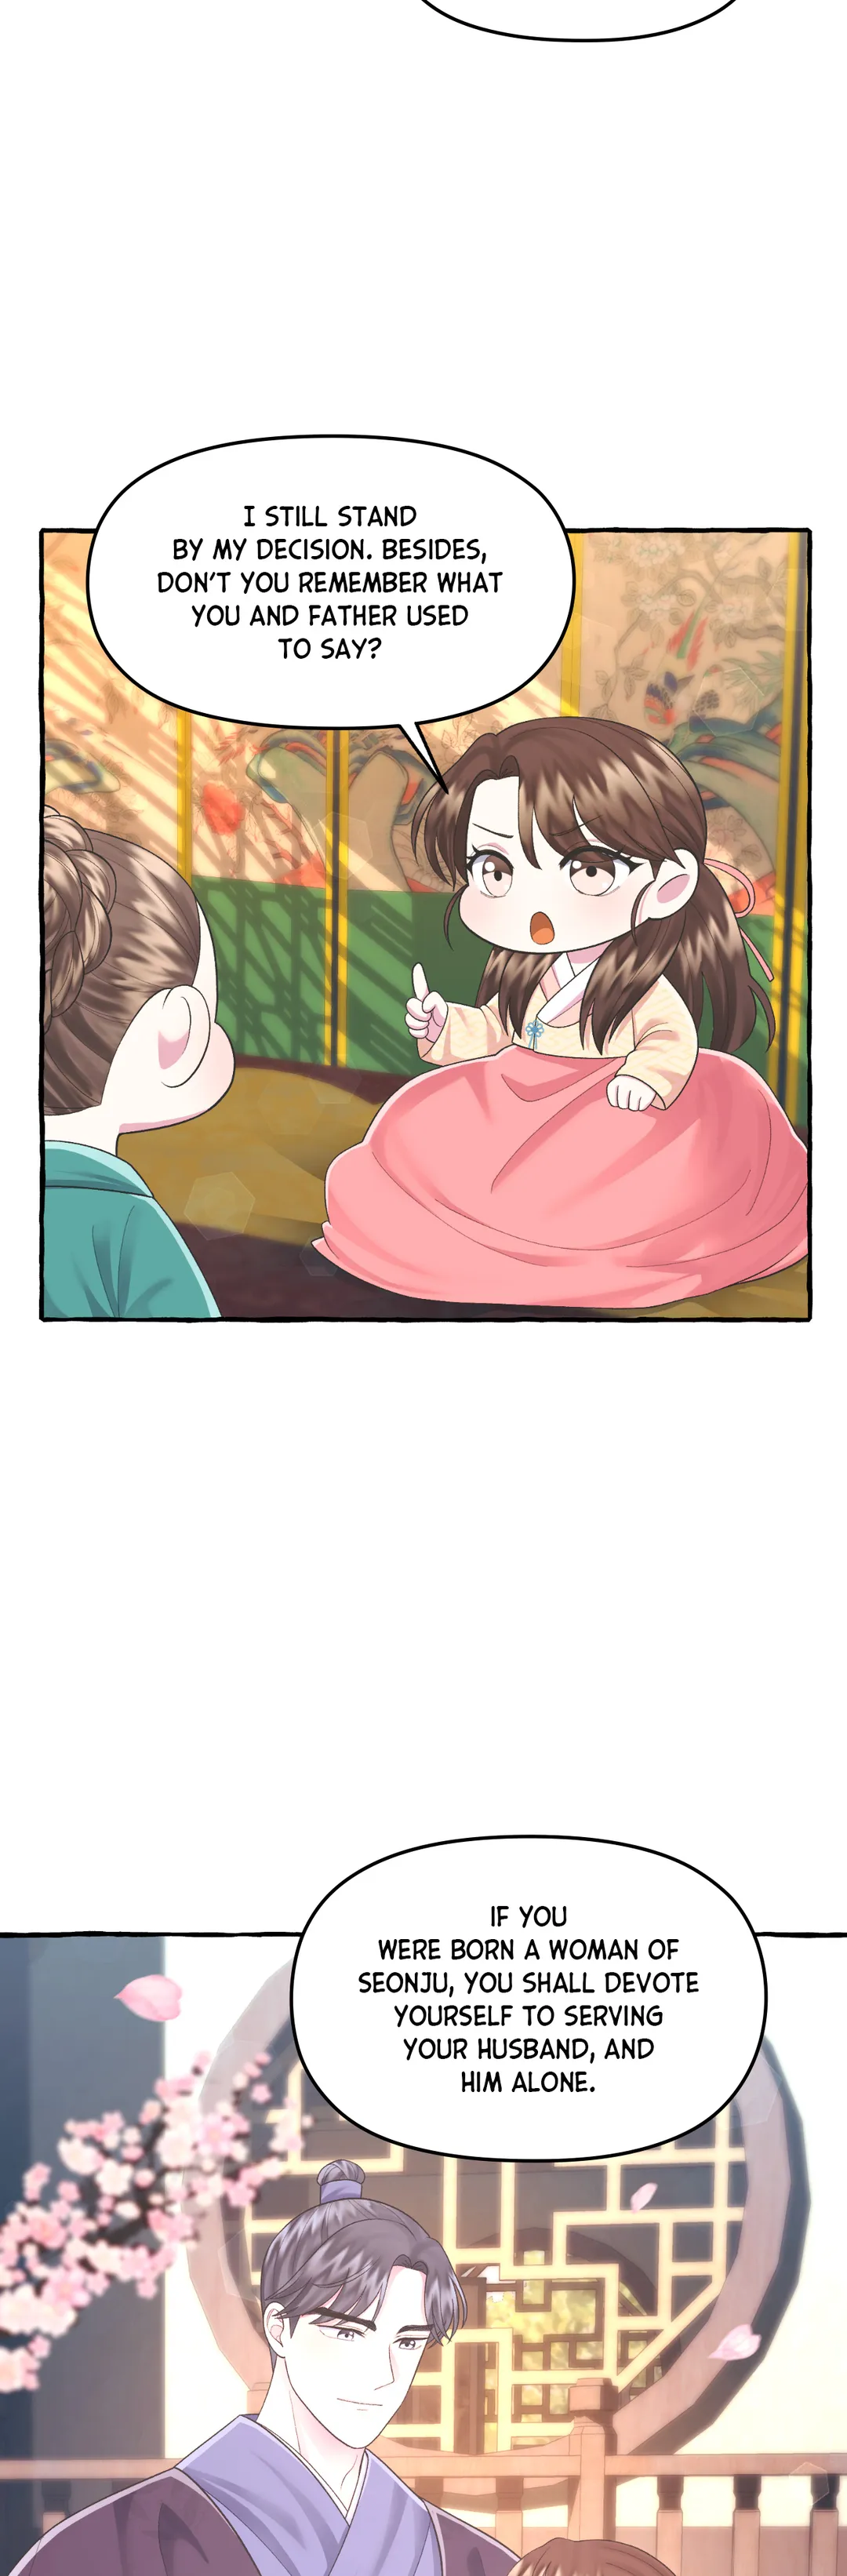 Cheer Up, Your Highness! chapter 29